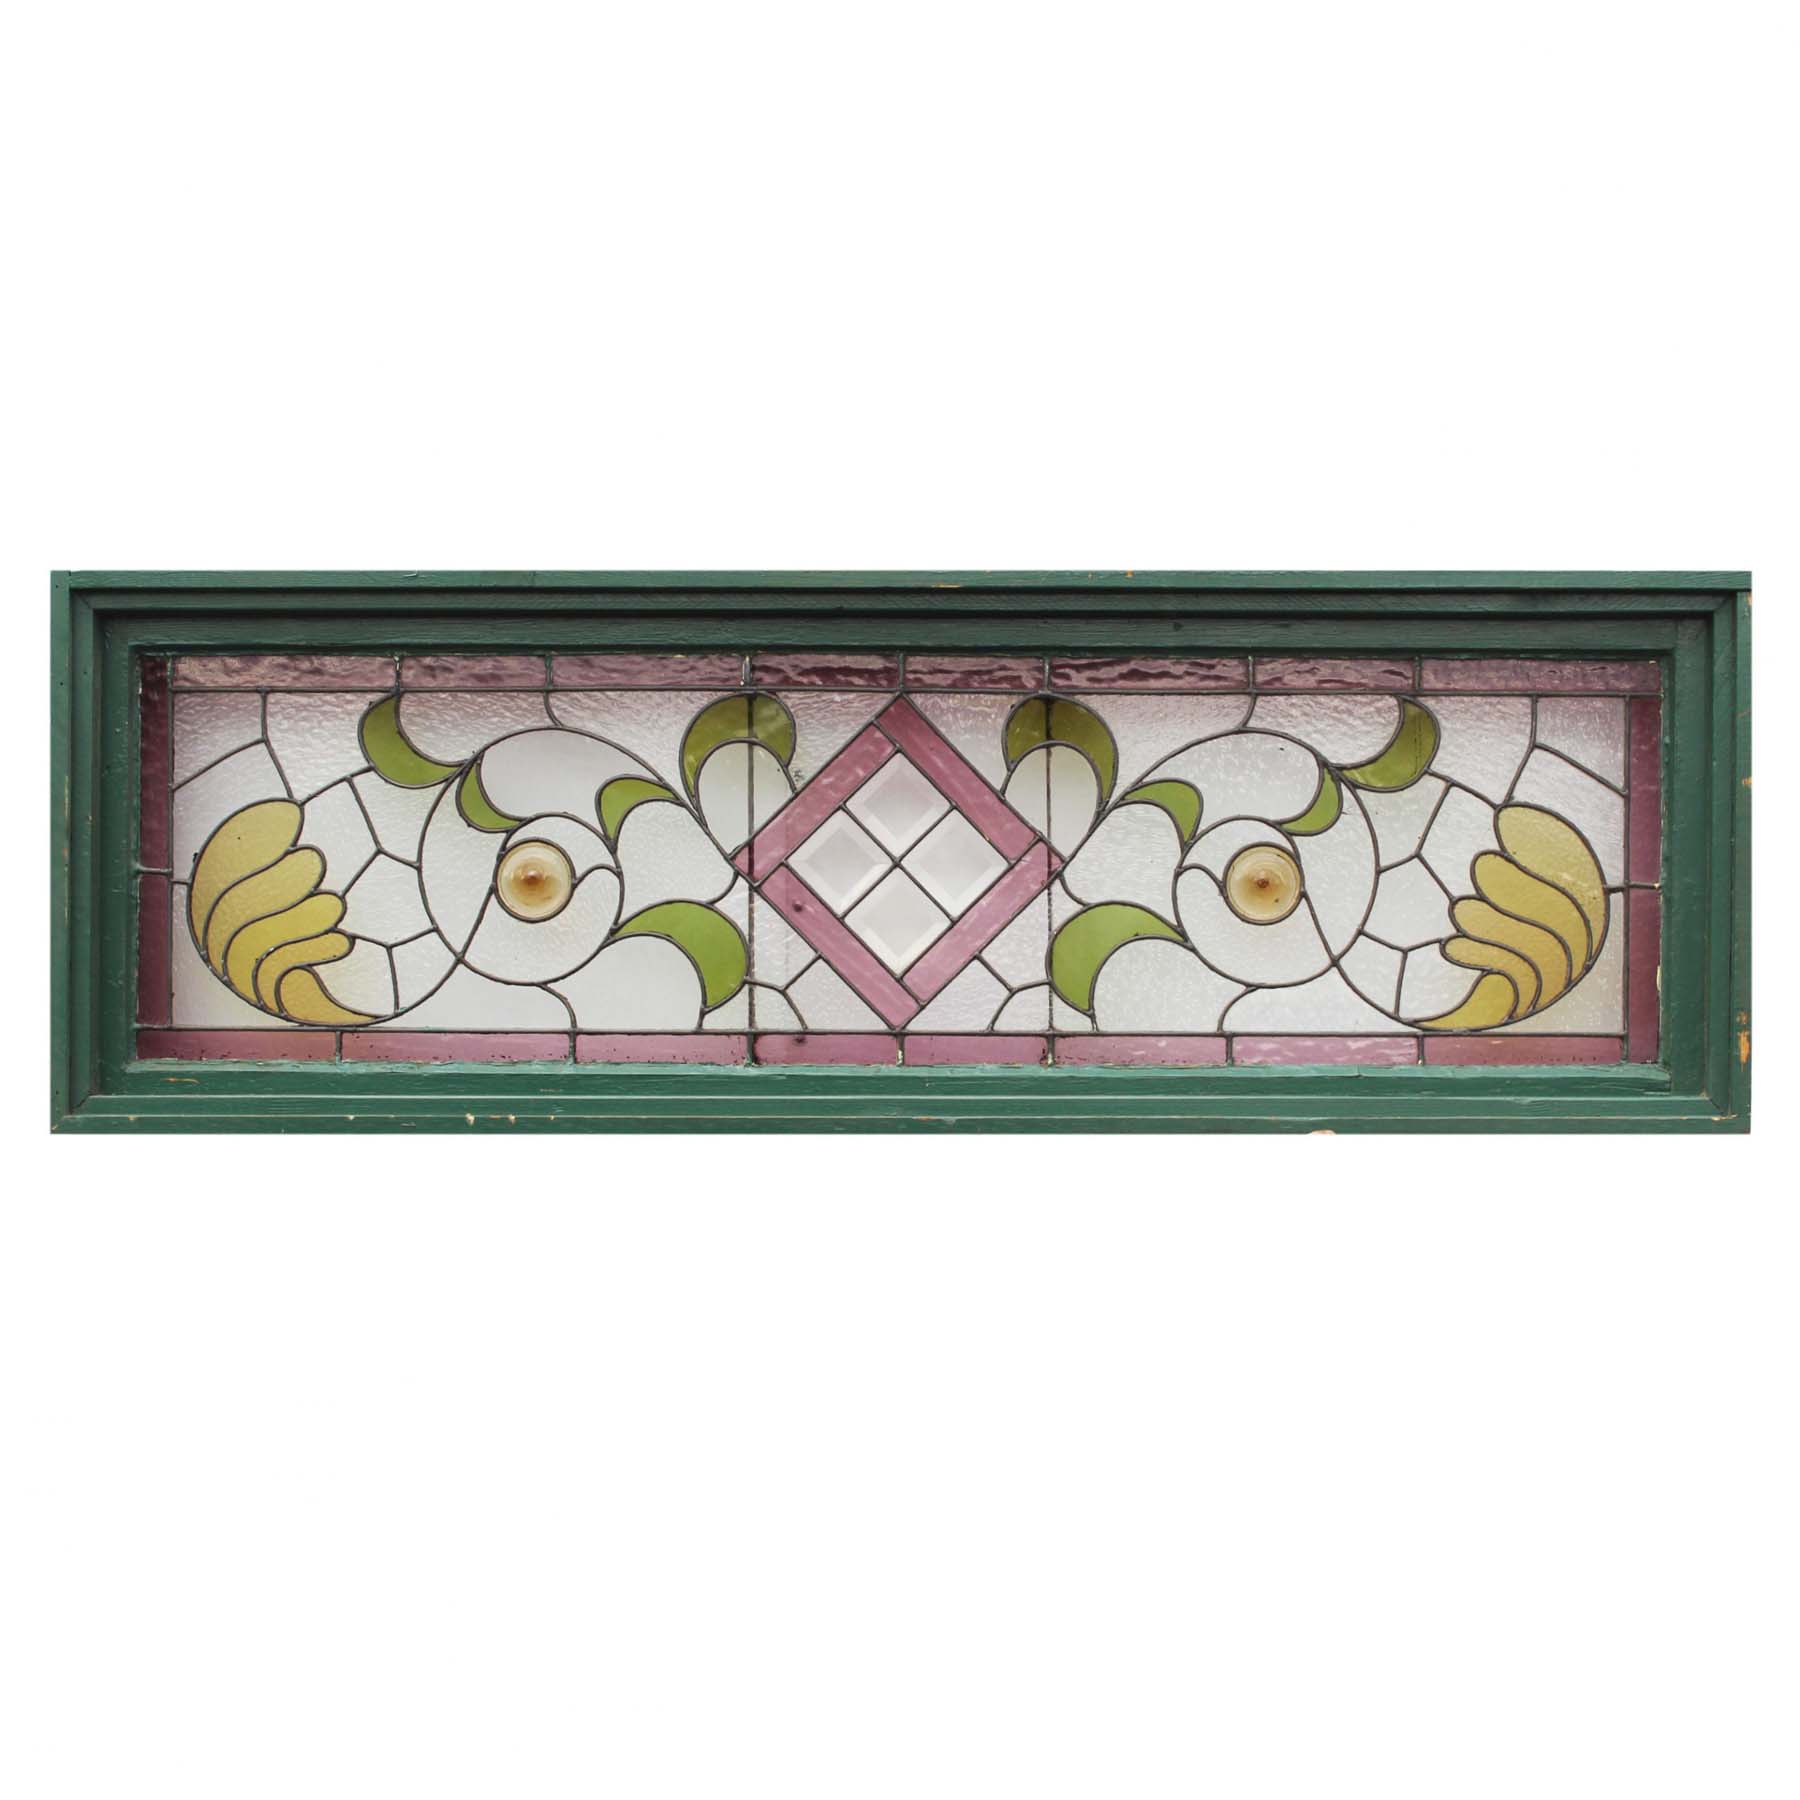 SOLD Antique American Stained Glass Window, Early 1900s-0